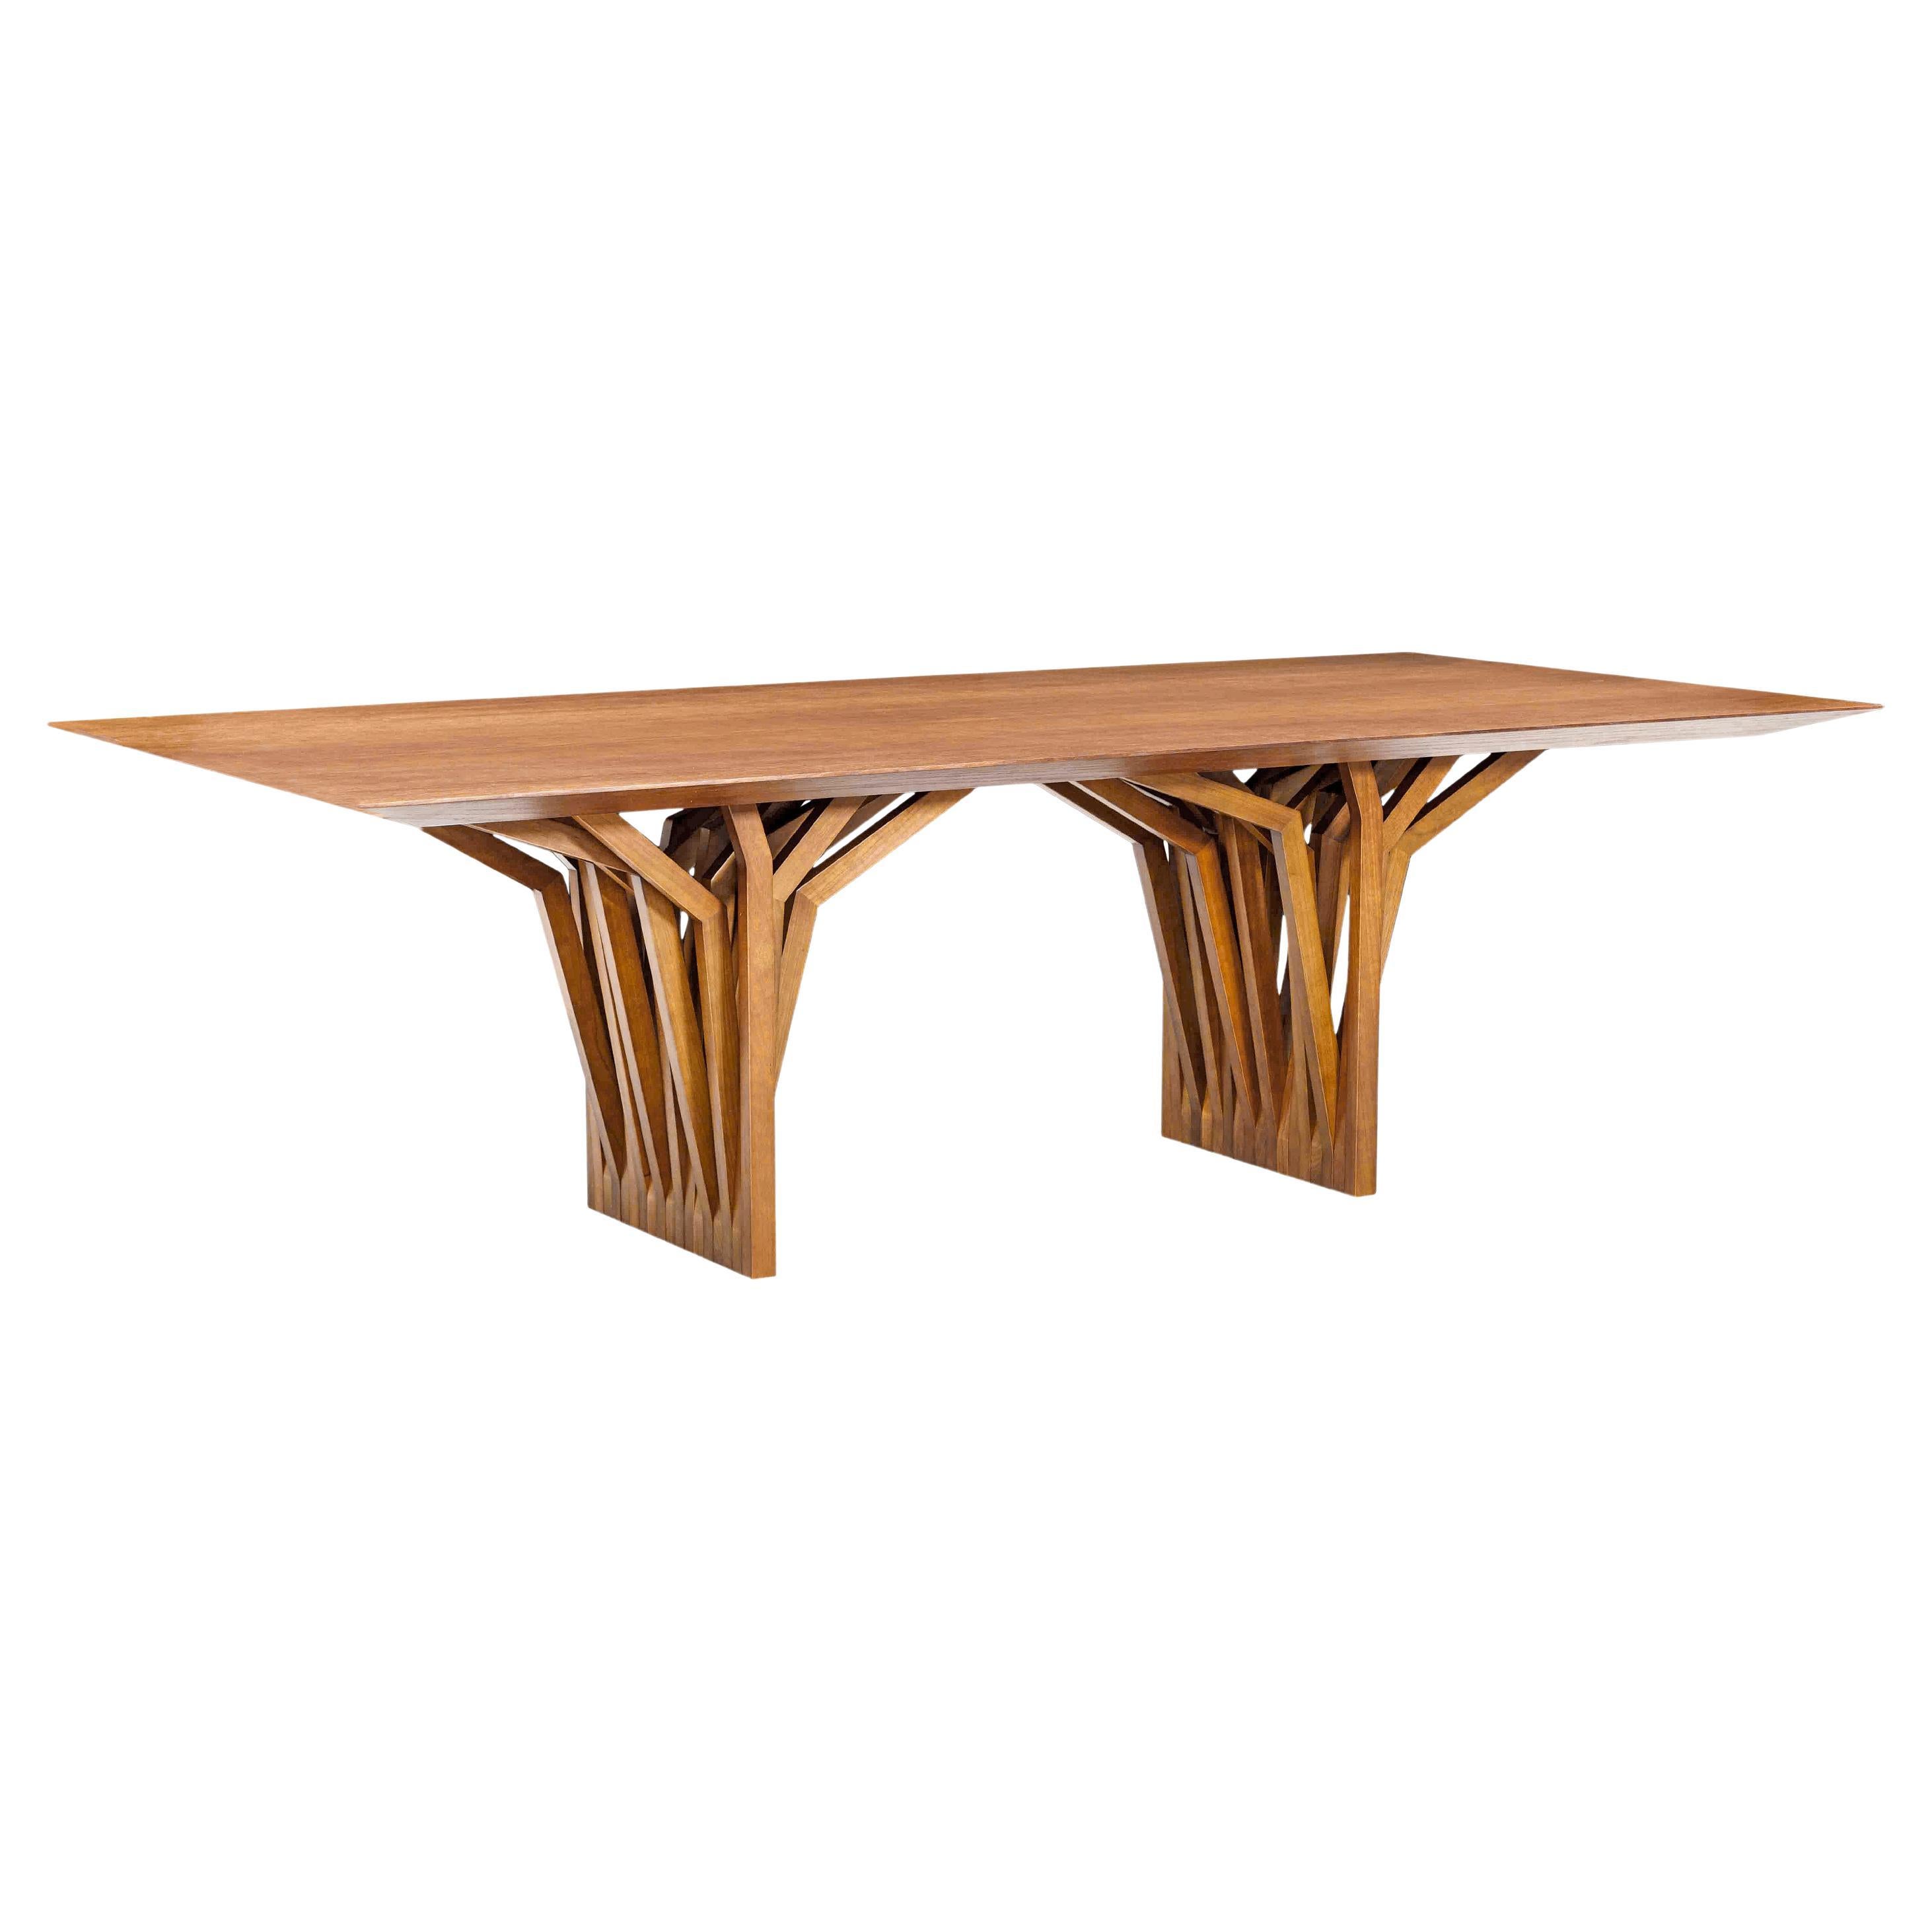 Radi Dining Table with Almond Oak Wood Veneered Table Top 98'' For Sale